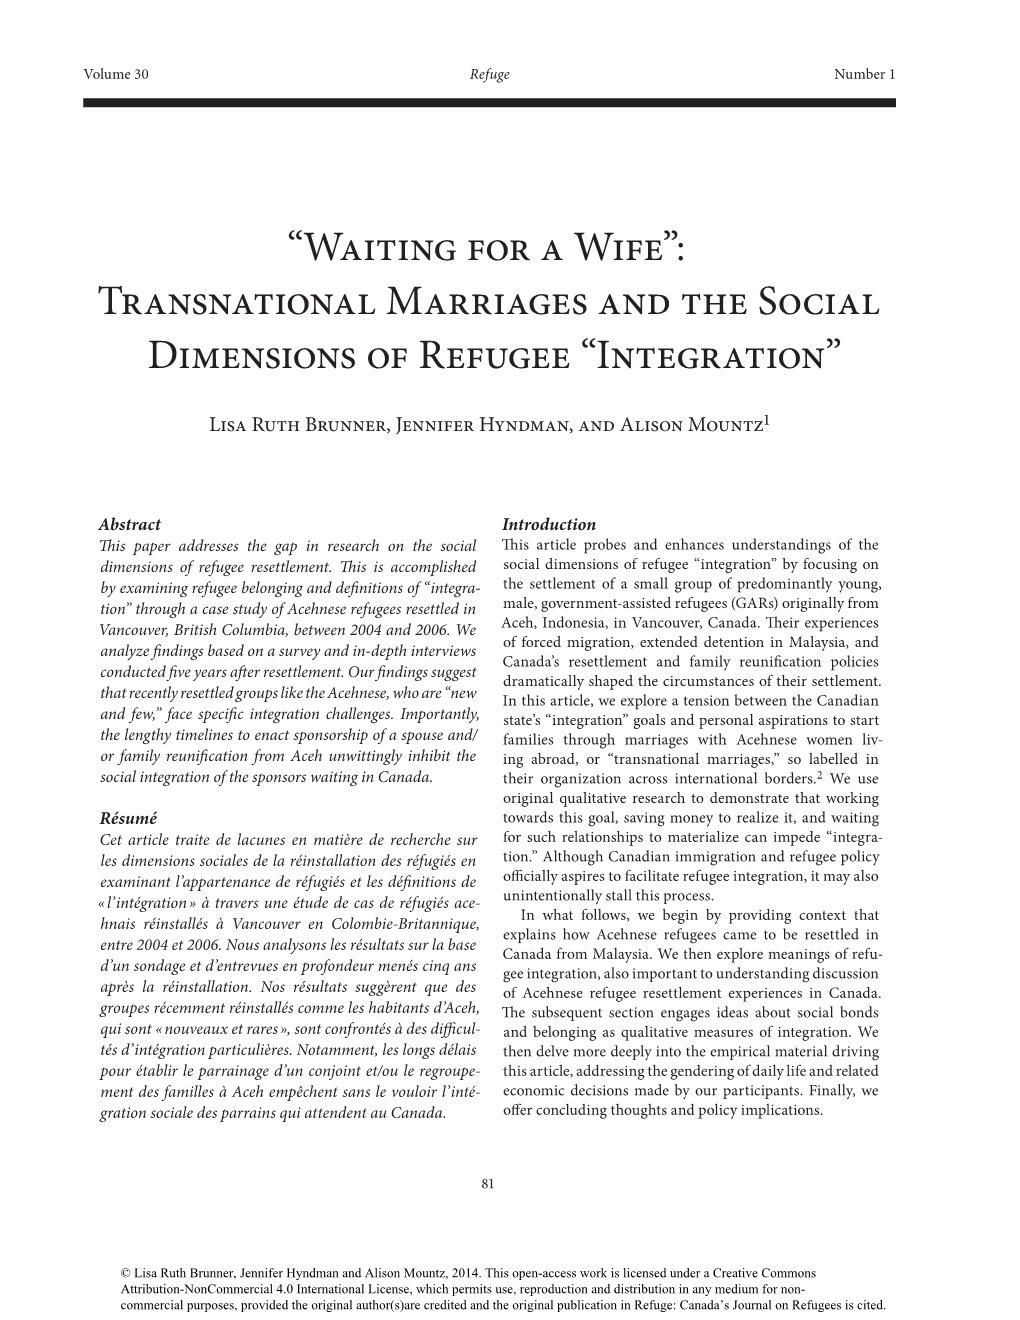 “Waiting for a Wife”: Transnational Marriages and the Social Dimensions of Refugee “Integration”